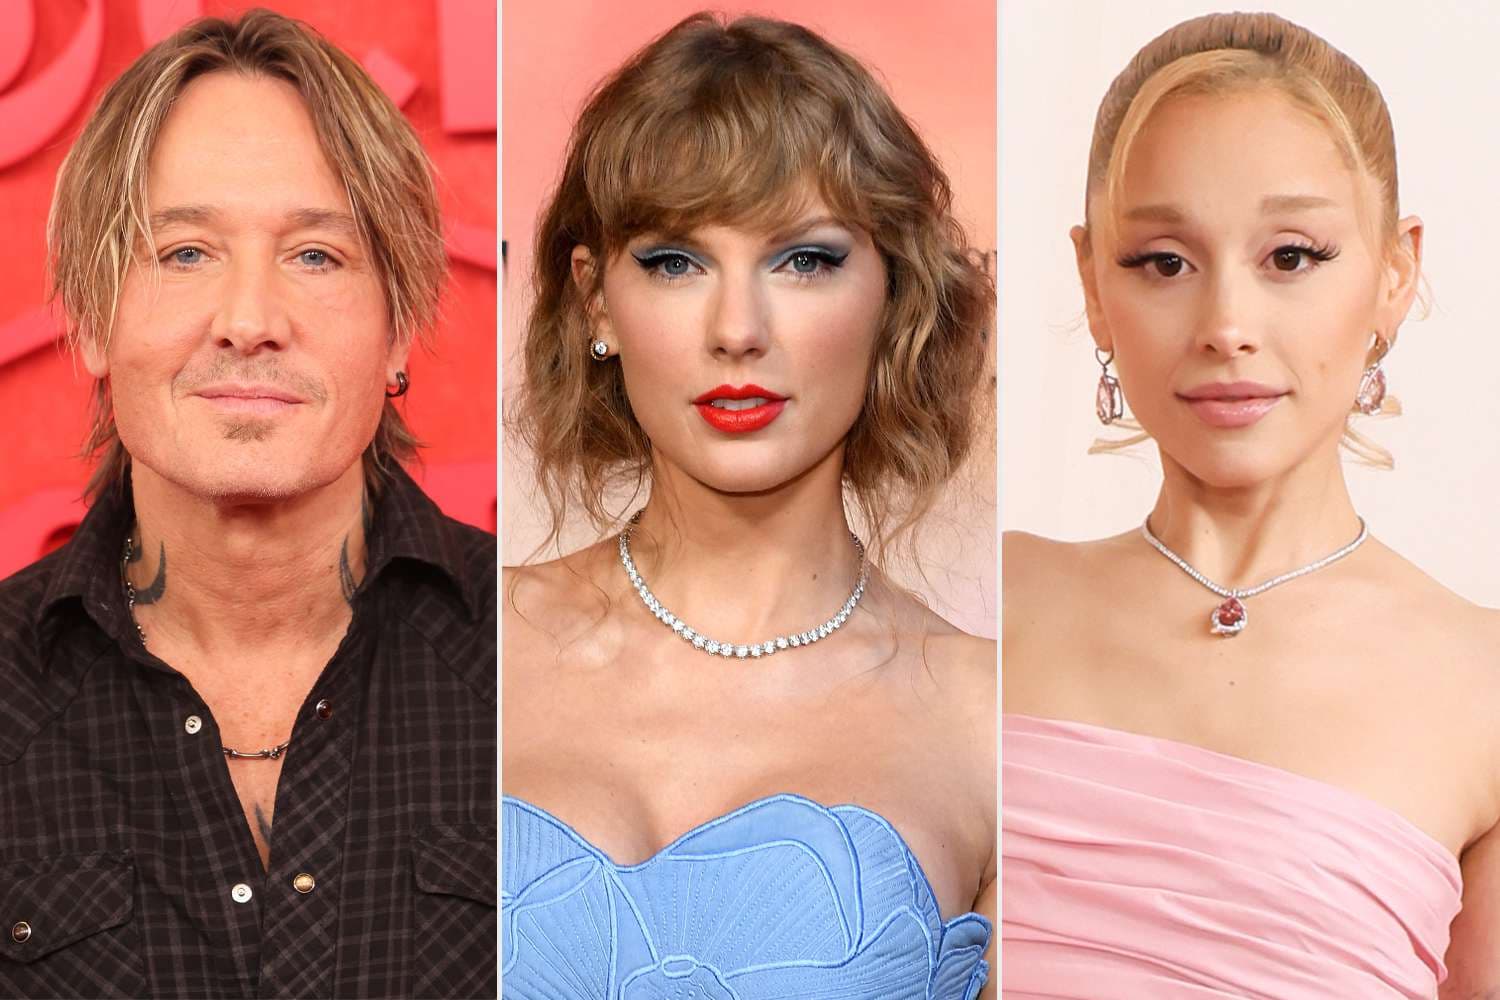 Keith Urban Talks the Extraordinary Taylor Swift and His Ariana Grande Obsession (Exclusive) – PEOPLE